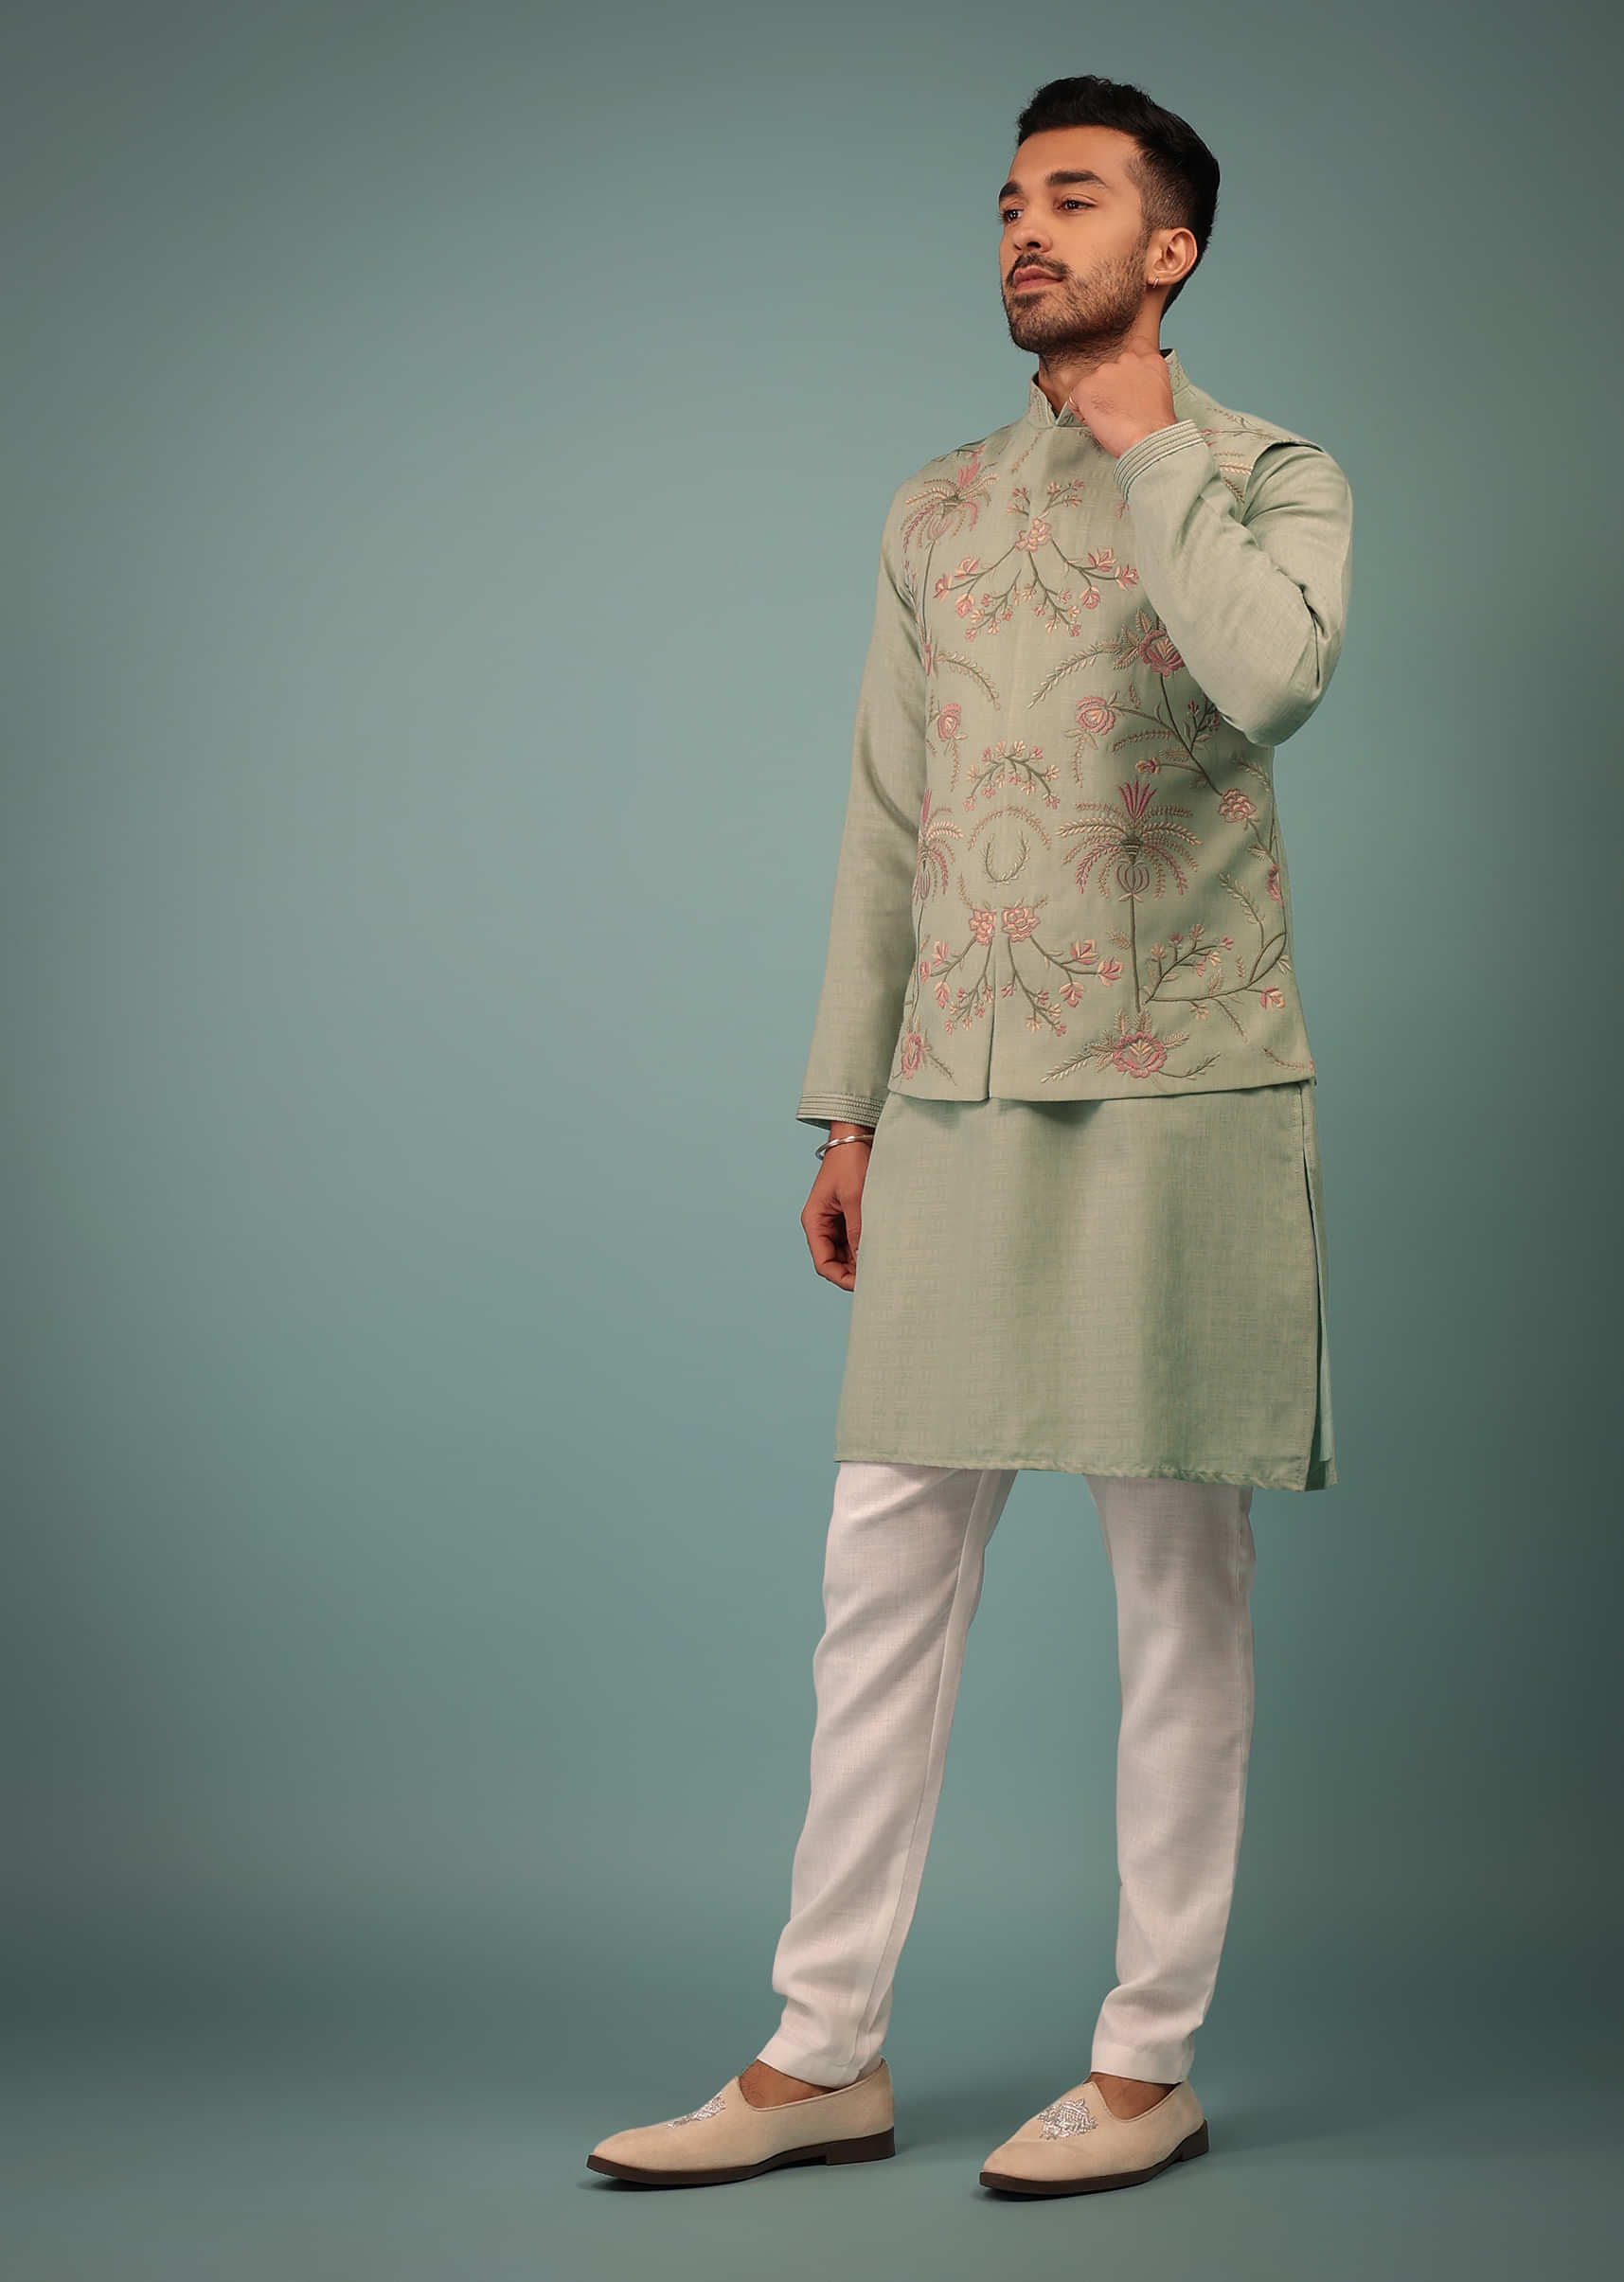 Fog Green Bandi Jacket Set In Handloom With Multicolor Floral Jaal Embroidery